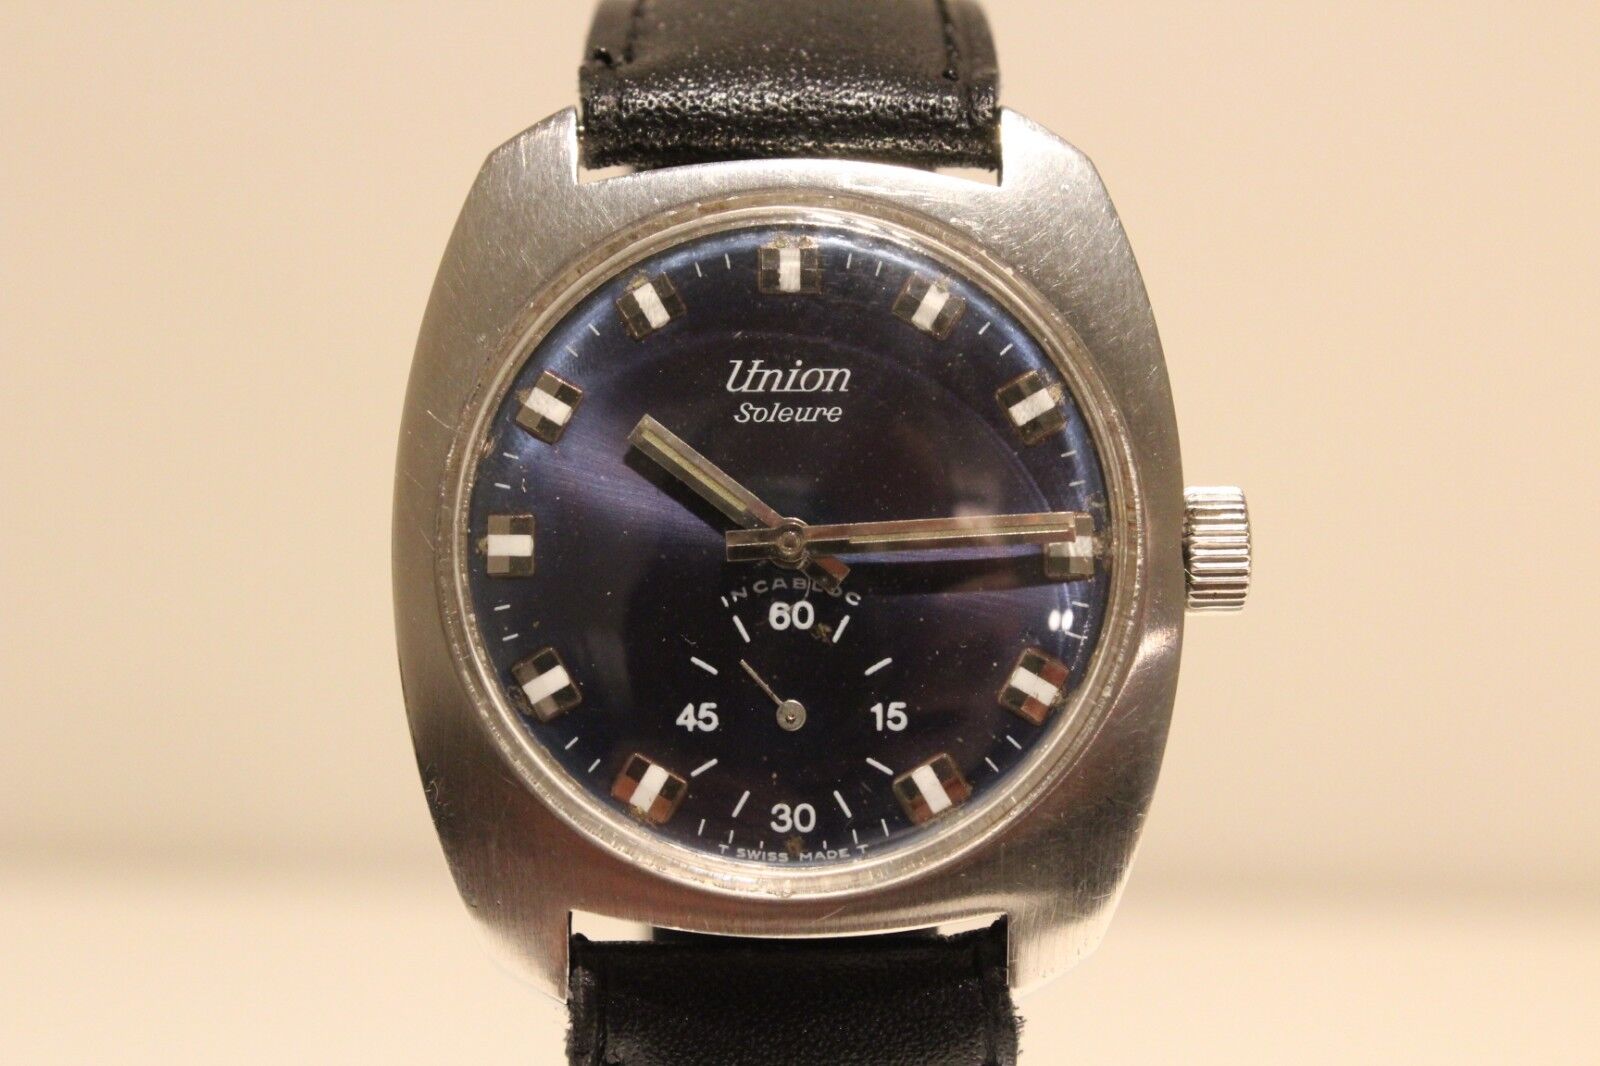 VINTAGE RARE NICE CLASSIC ALL STAINLESS STEEL MEN'S SWISS WATCH "UNION SOLEURE" 